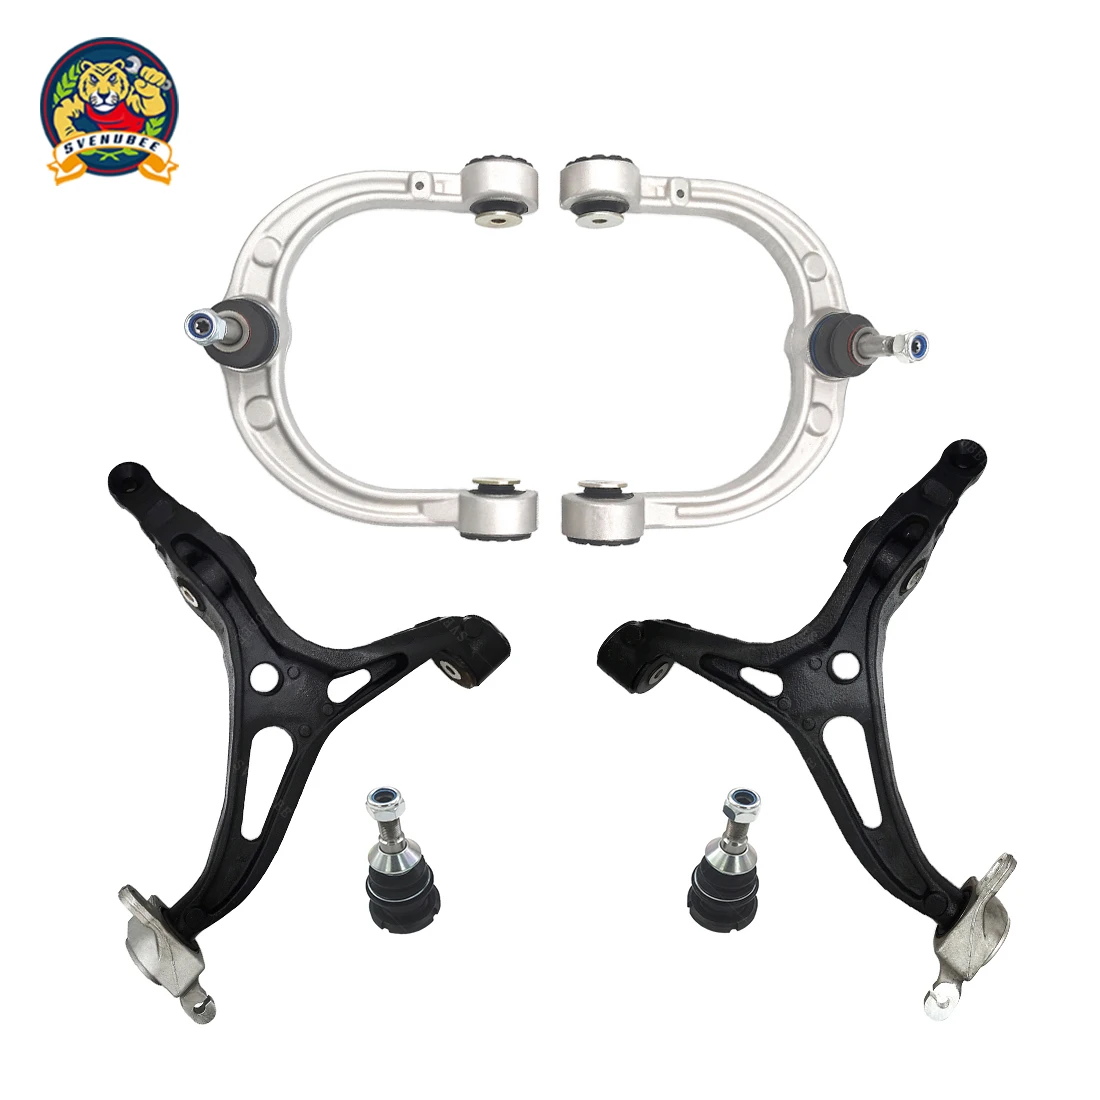 

Svenubee Front Lower Control Arm with Ball Joints Kits for MERCEDES-BEN W164 GL350 GL450 ML550 2006 2007 2008 2009 - 2012